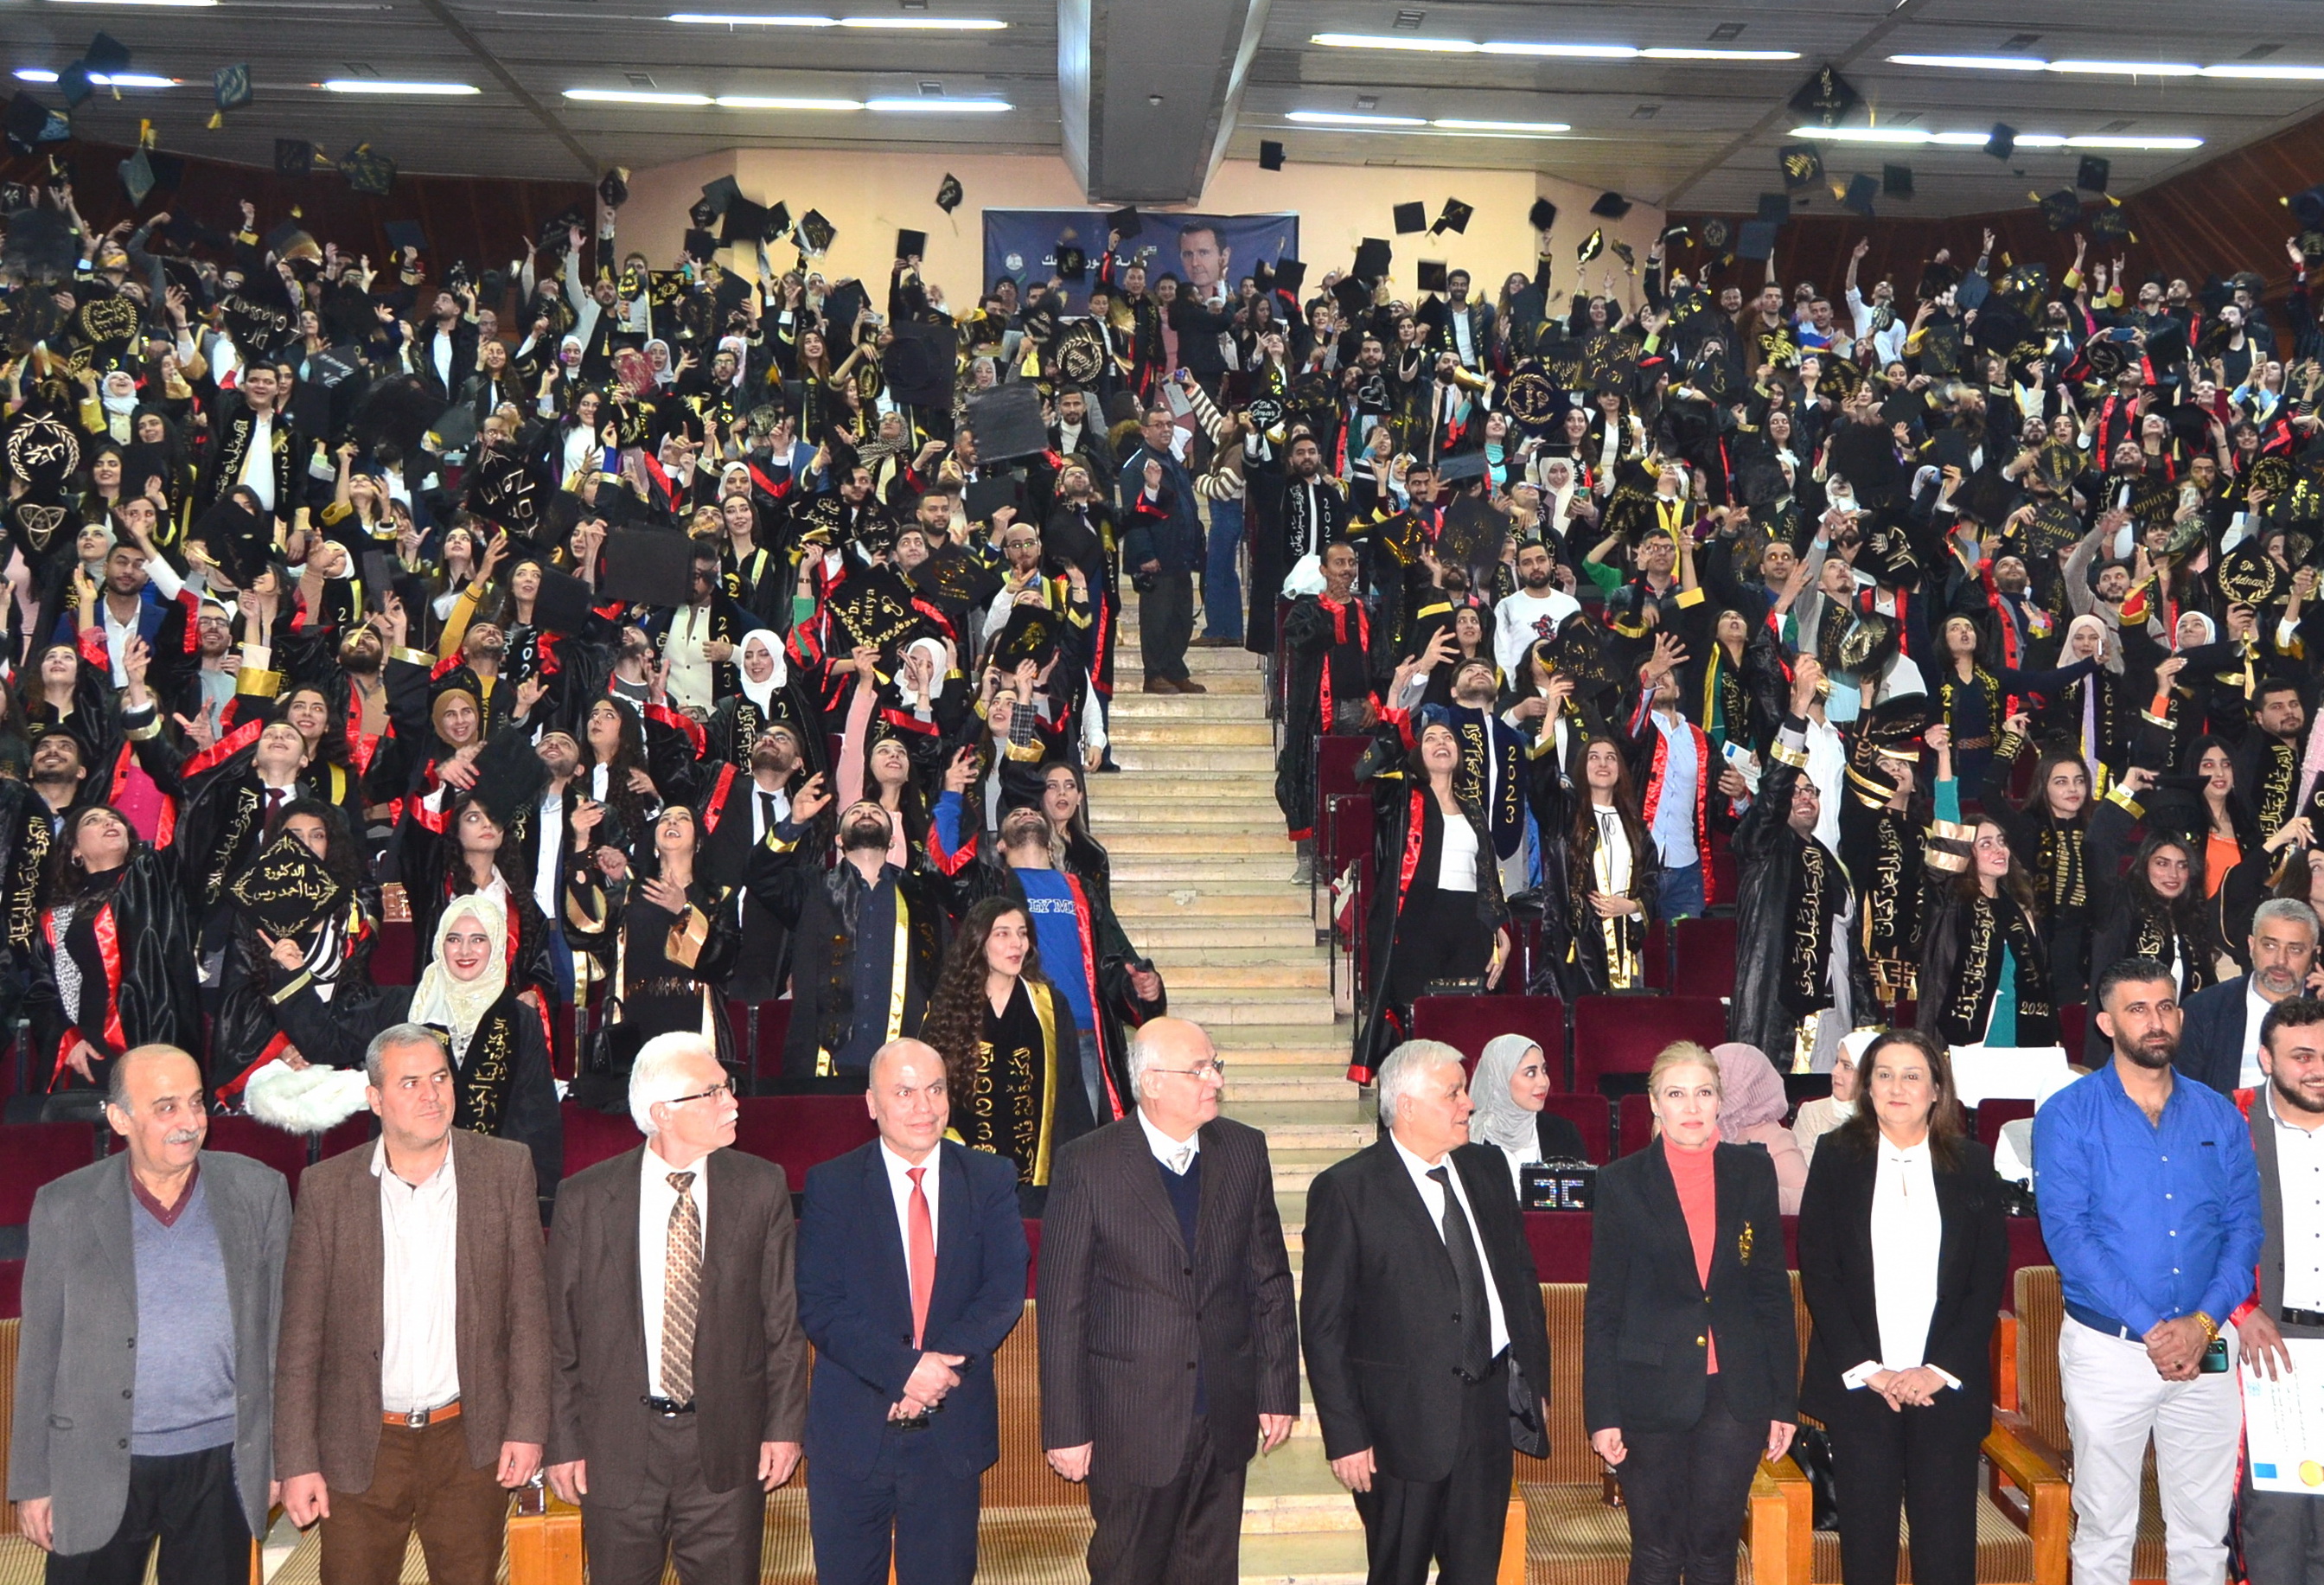 Tishreen University celebrates the graduation of 800 male and female students from the Faculty of Human Medicine